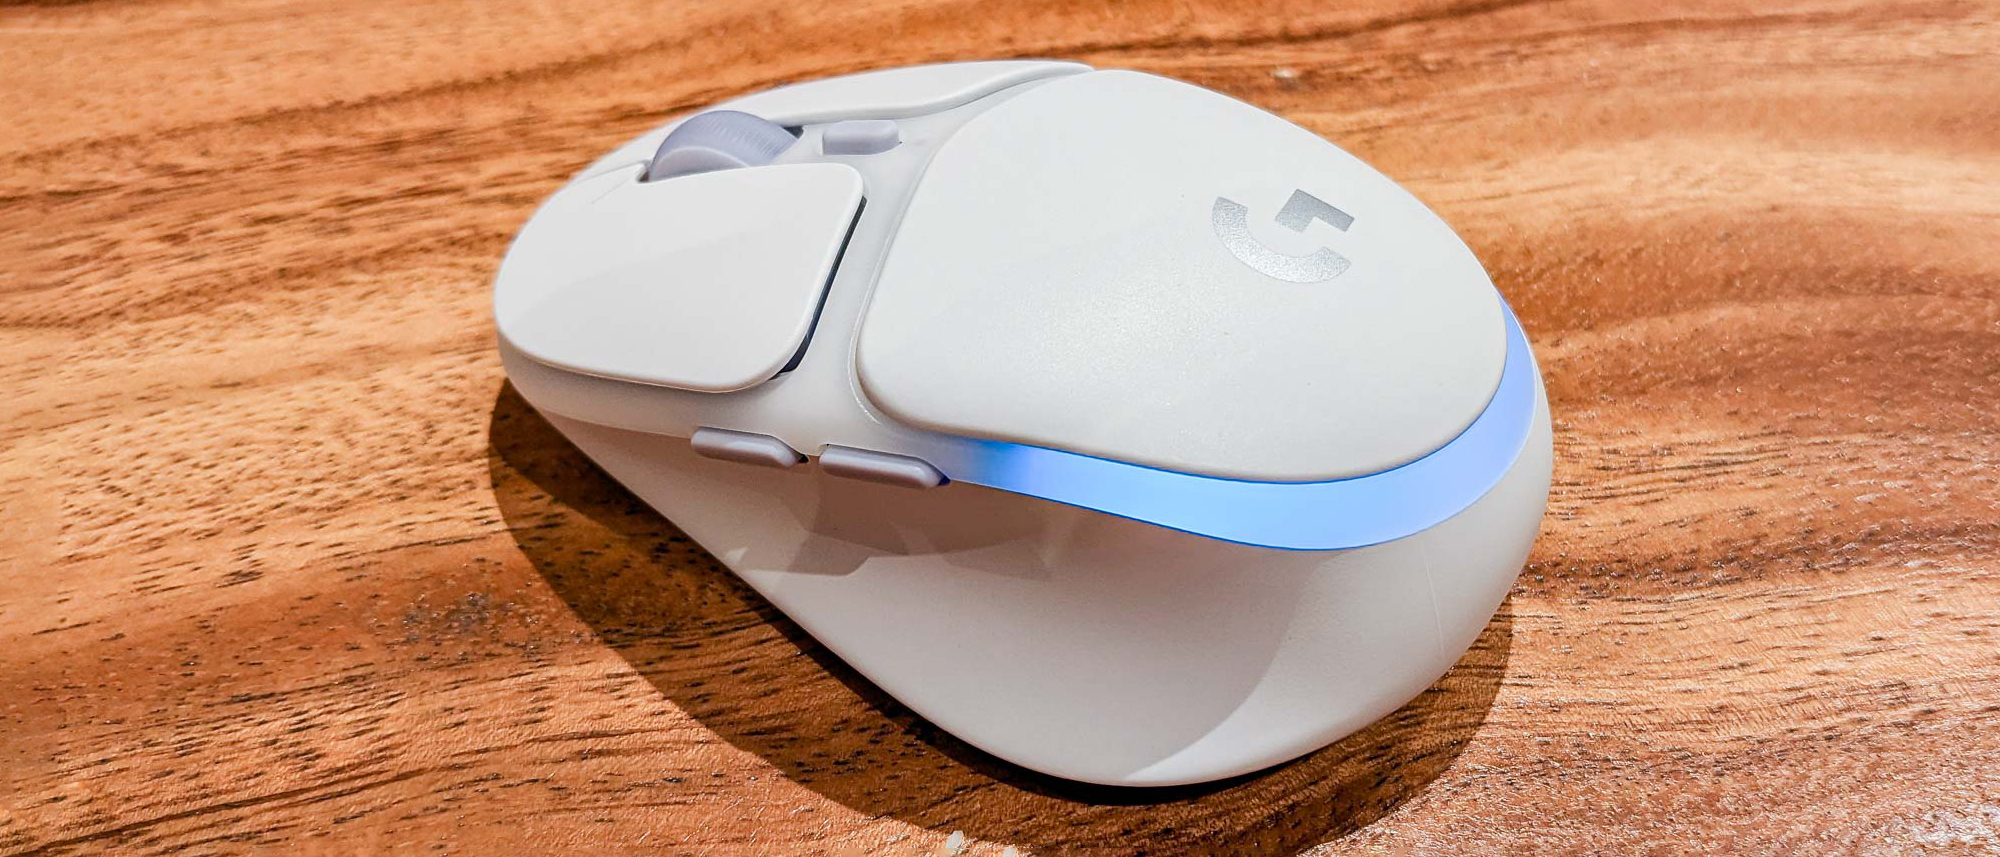 Logitech G705 Wireless Gaming Mouse review | Tom's Guide